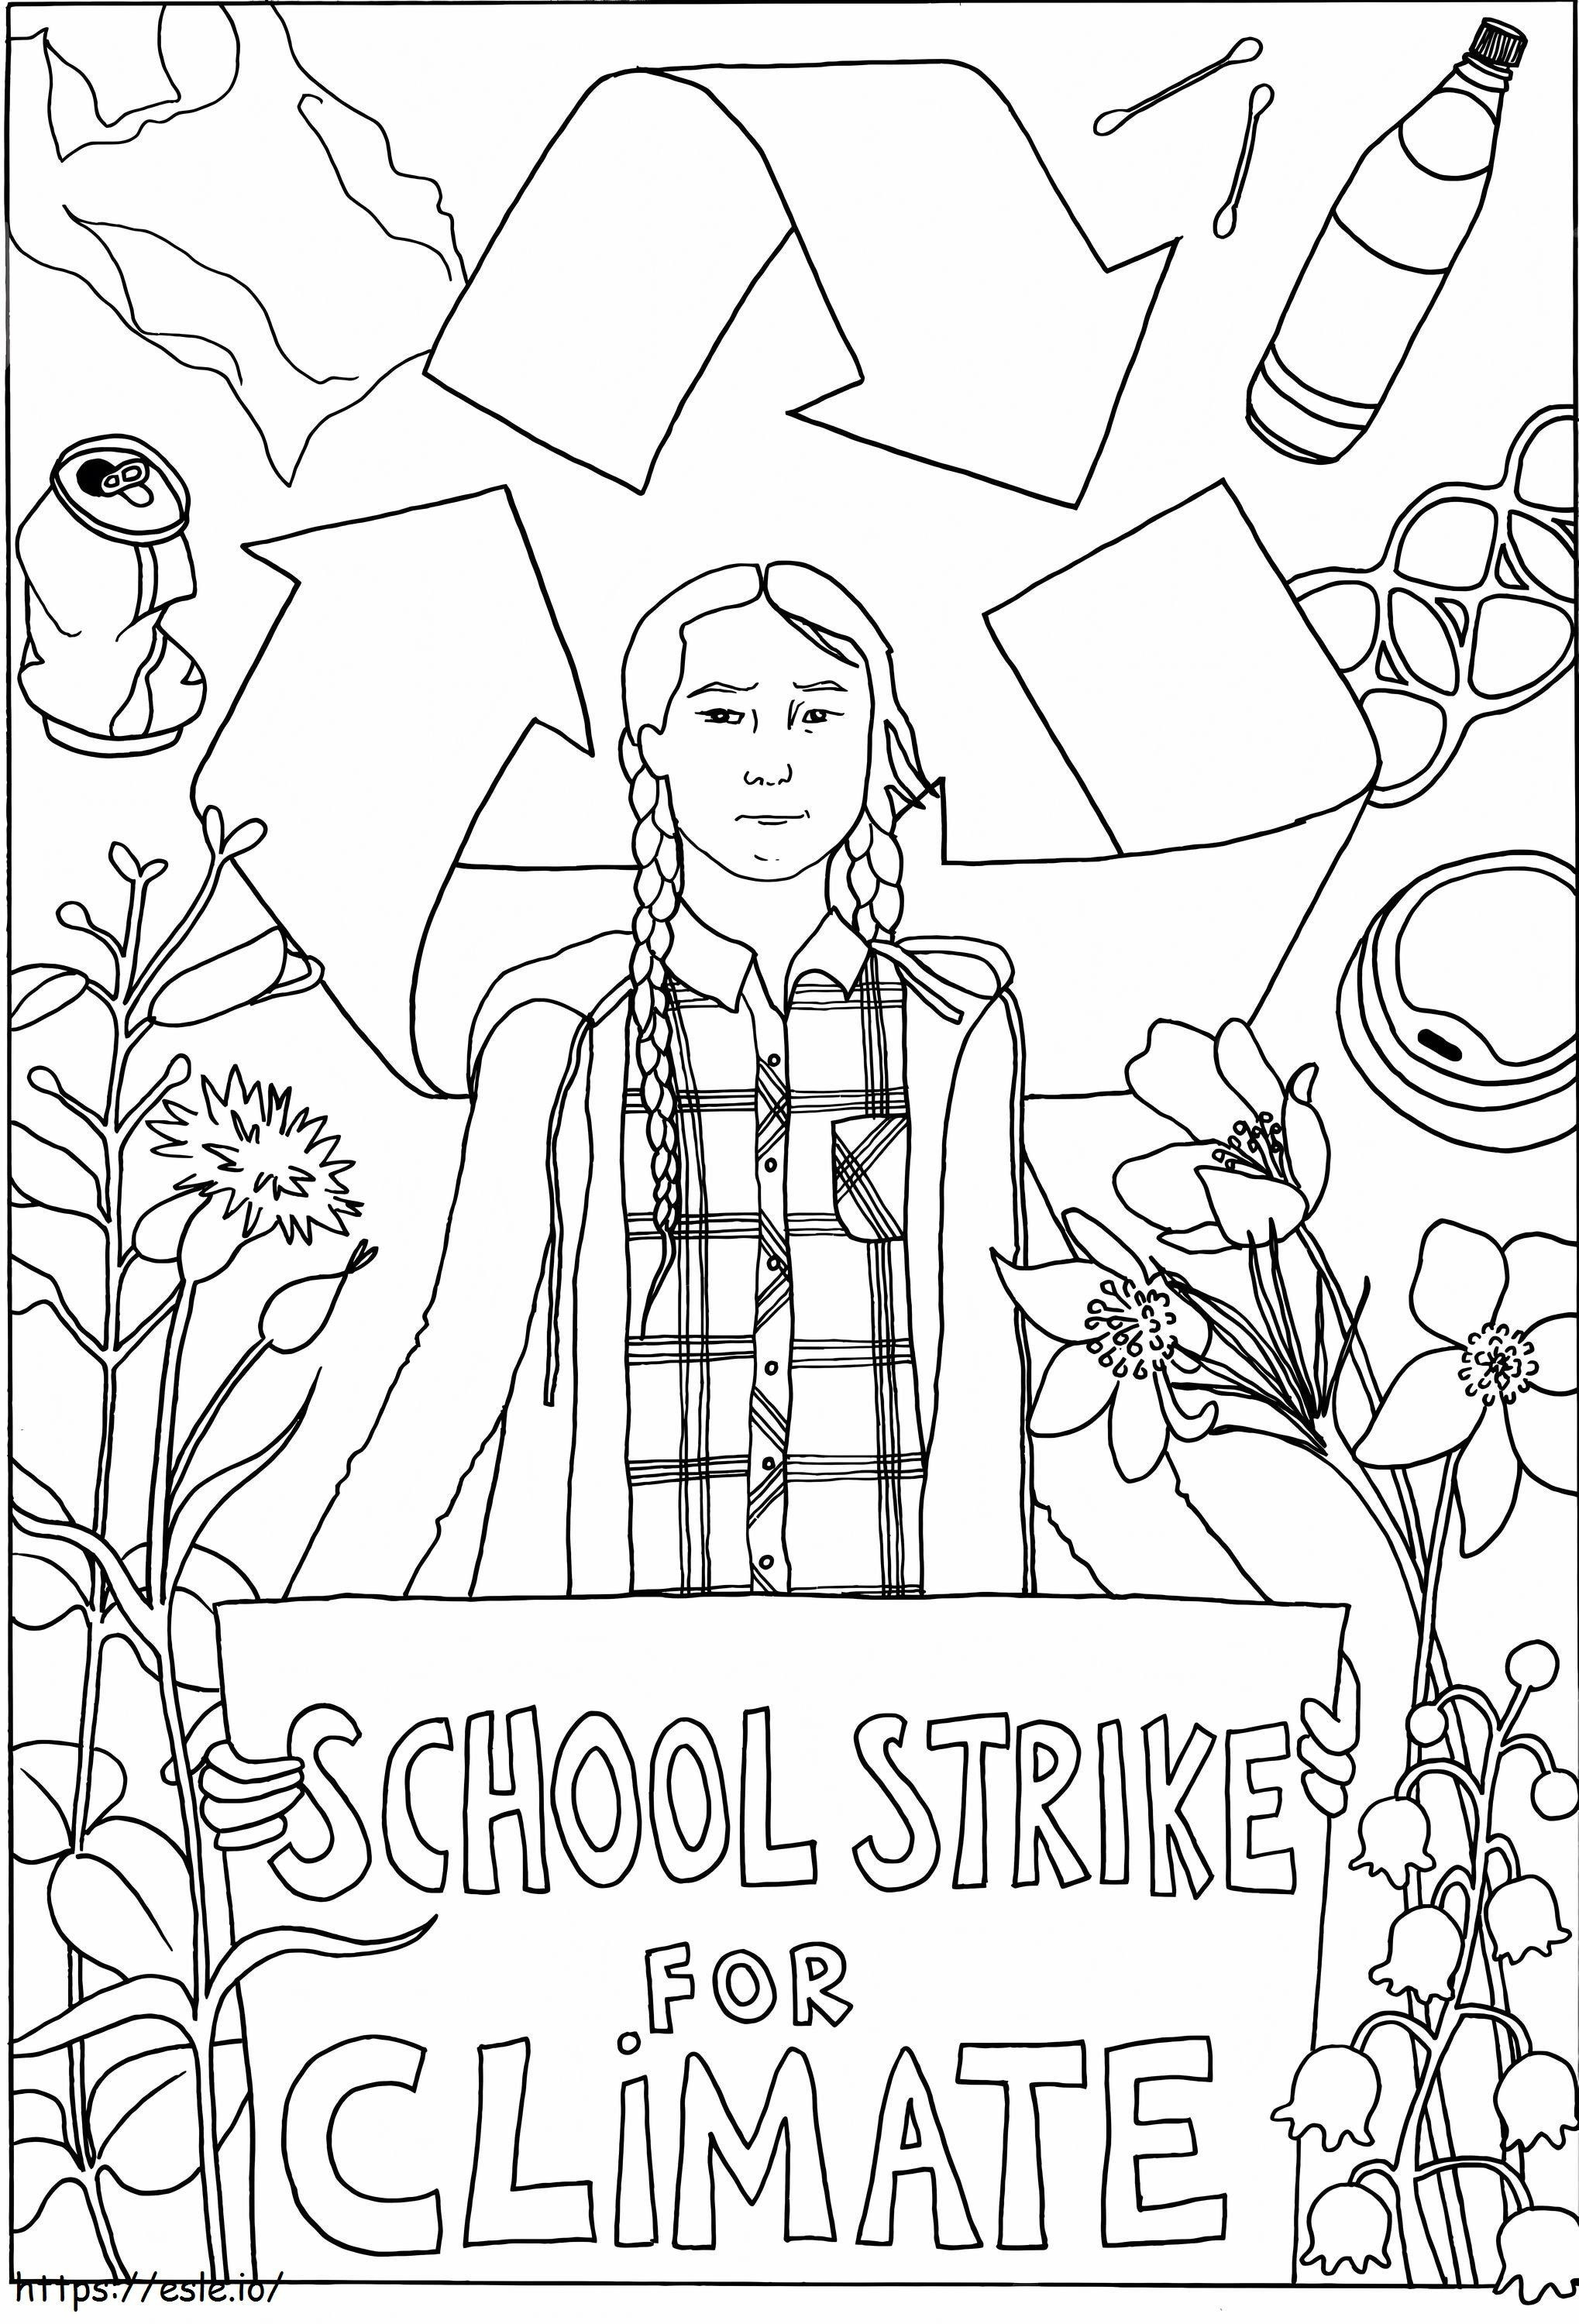 School Strike For Climate coloring page